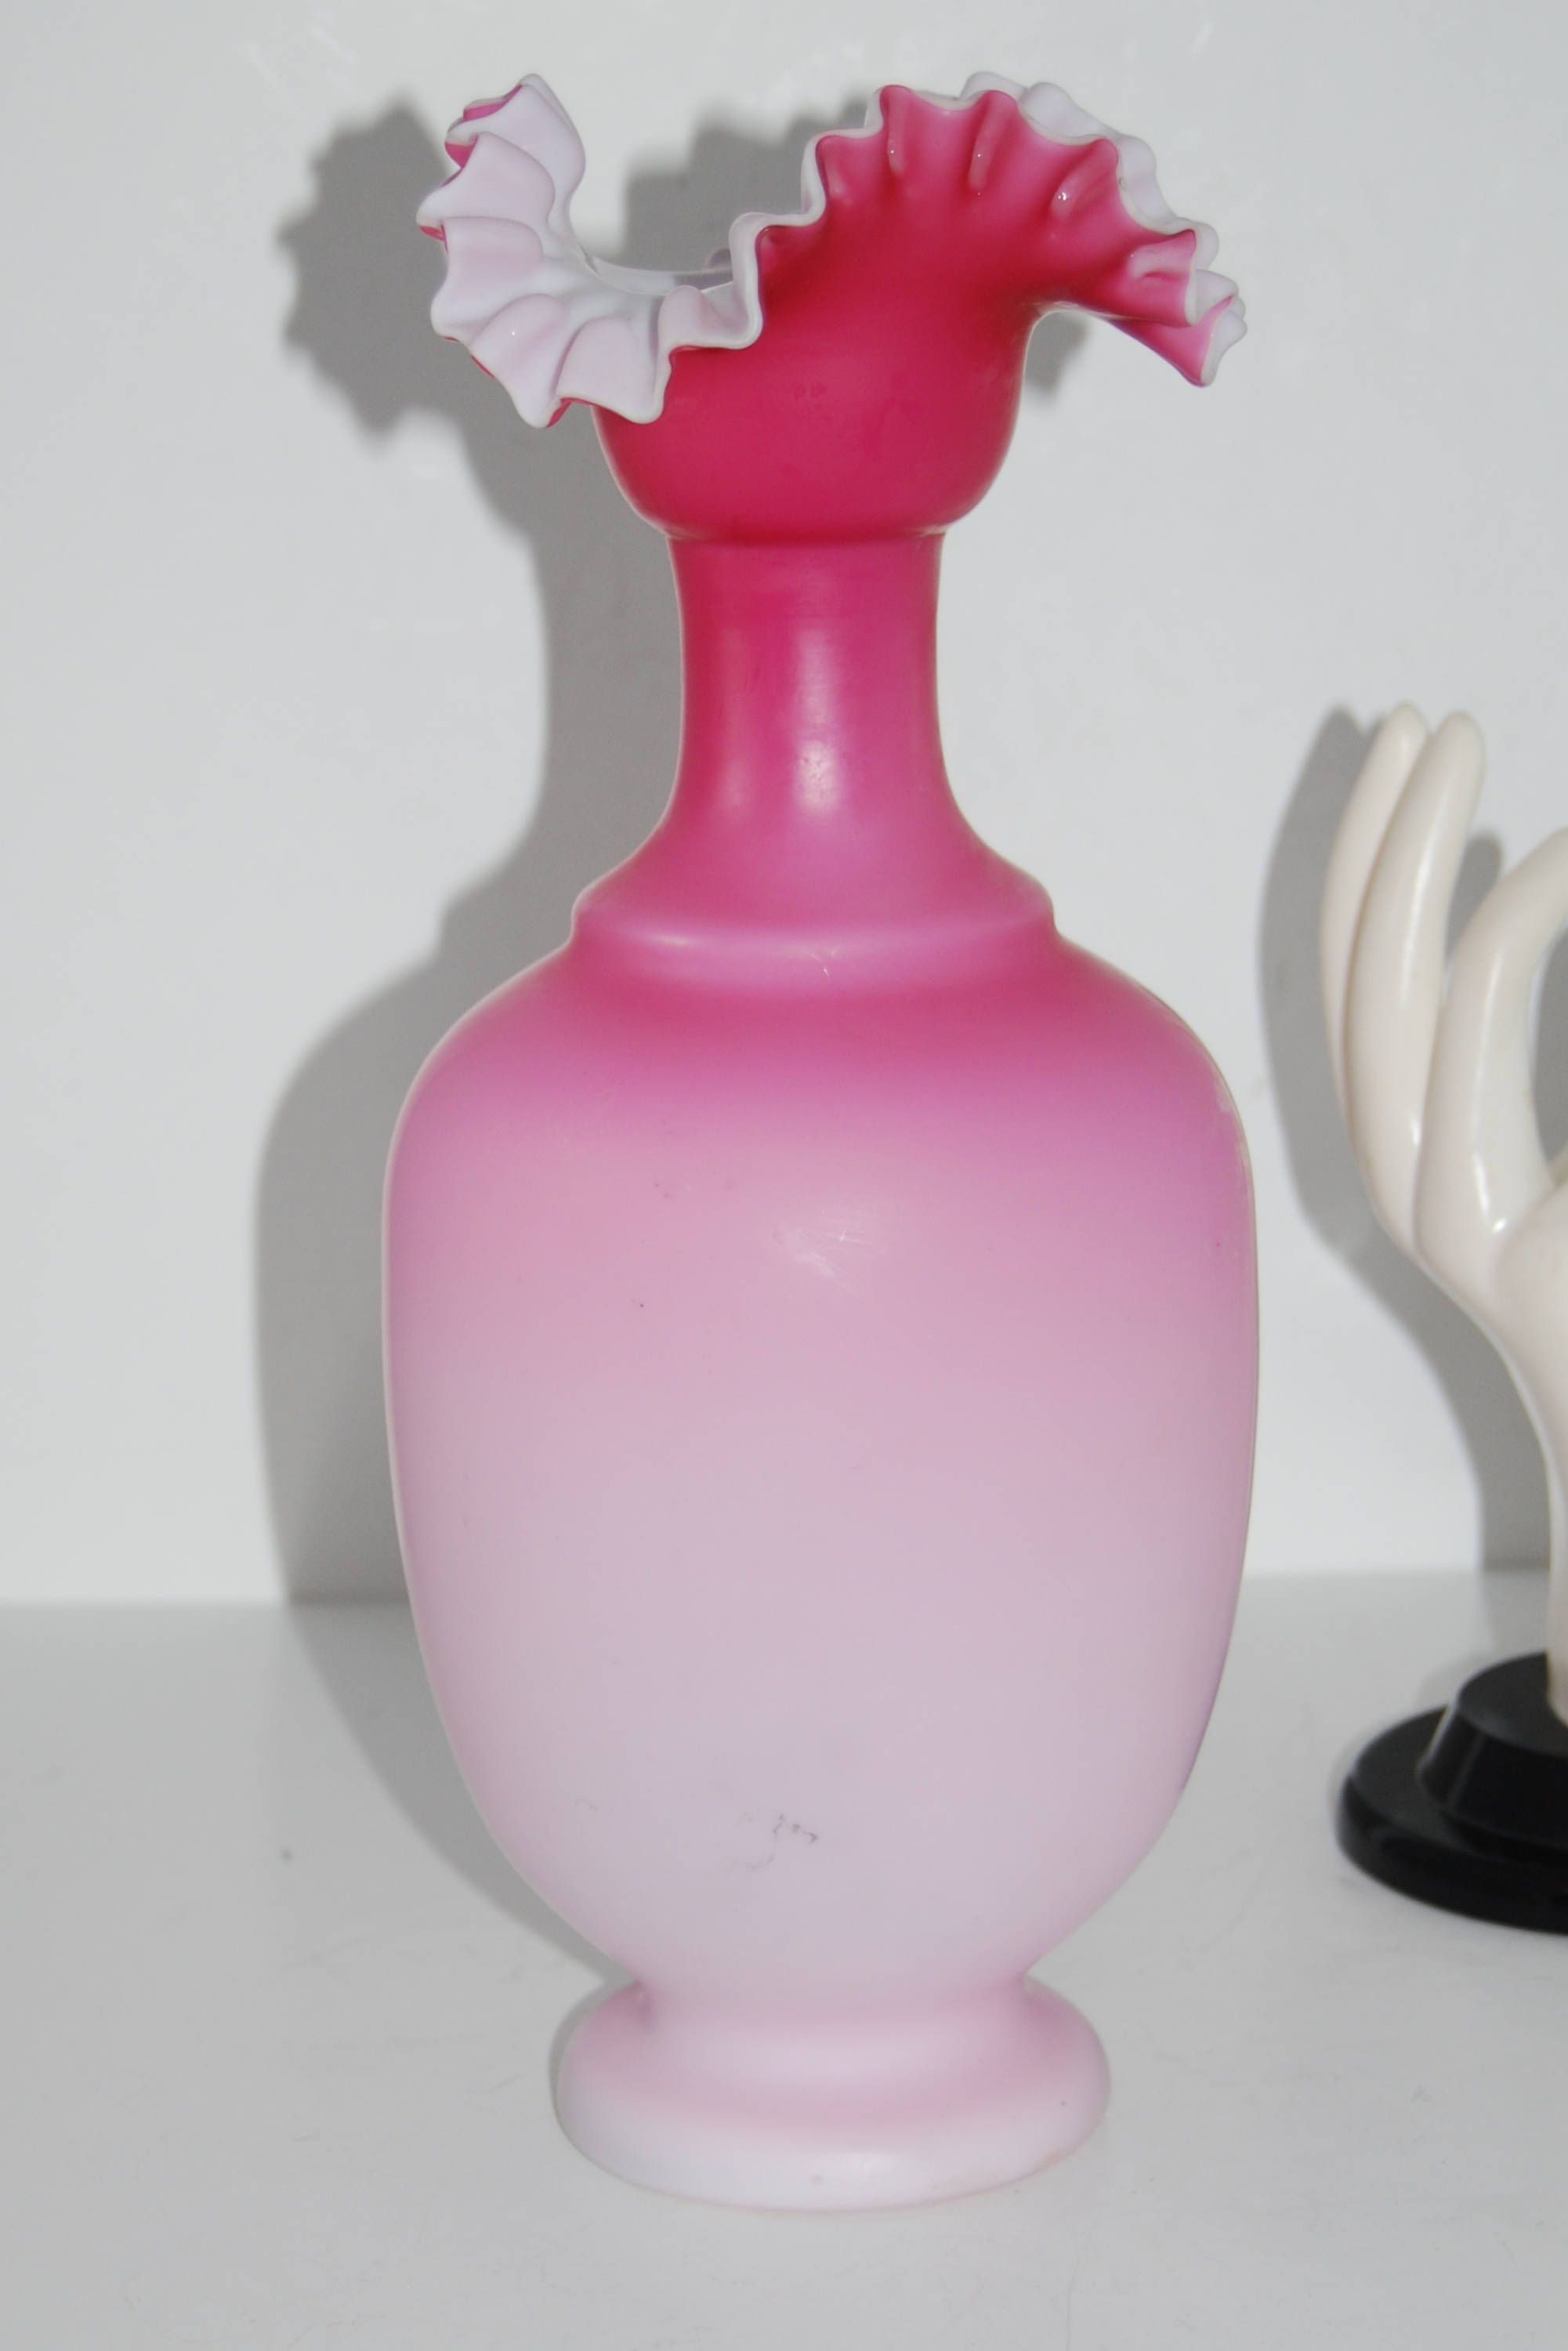 11 Great Victorian Flower Vase 2024 free download victorian flower vase of antique victorian glass vase pink white satin cased tall 11 25 with antique victorian glass vase pink white satin cased tall 11 25 pontil mark by savesitall on etsy